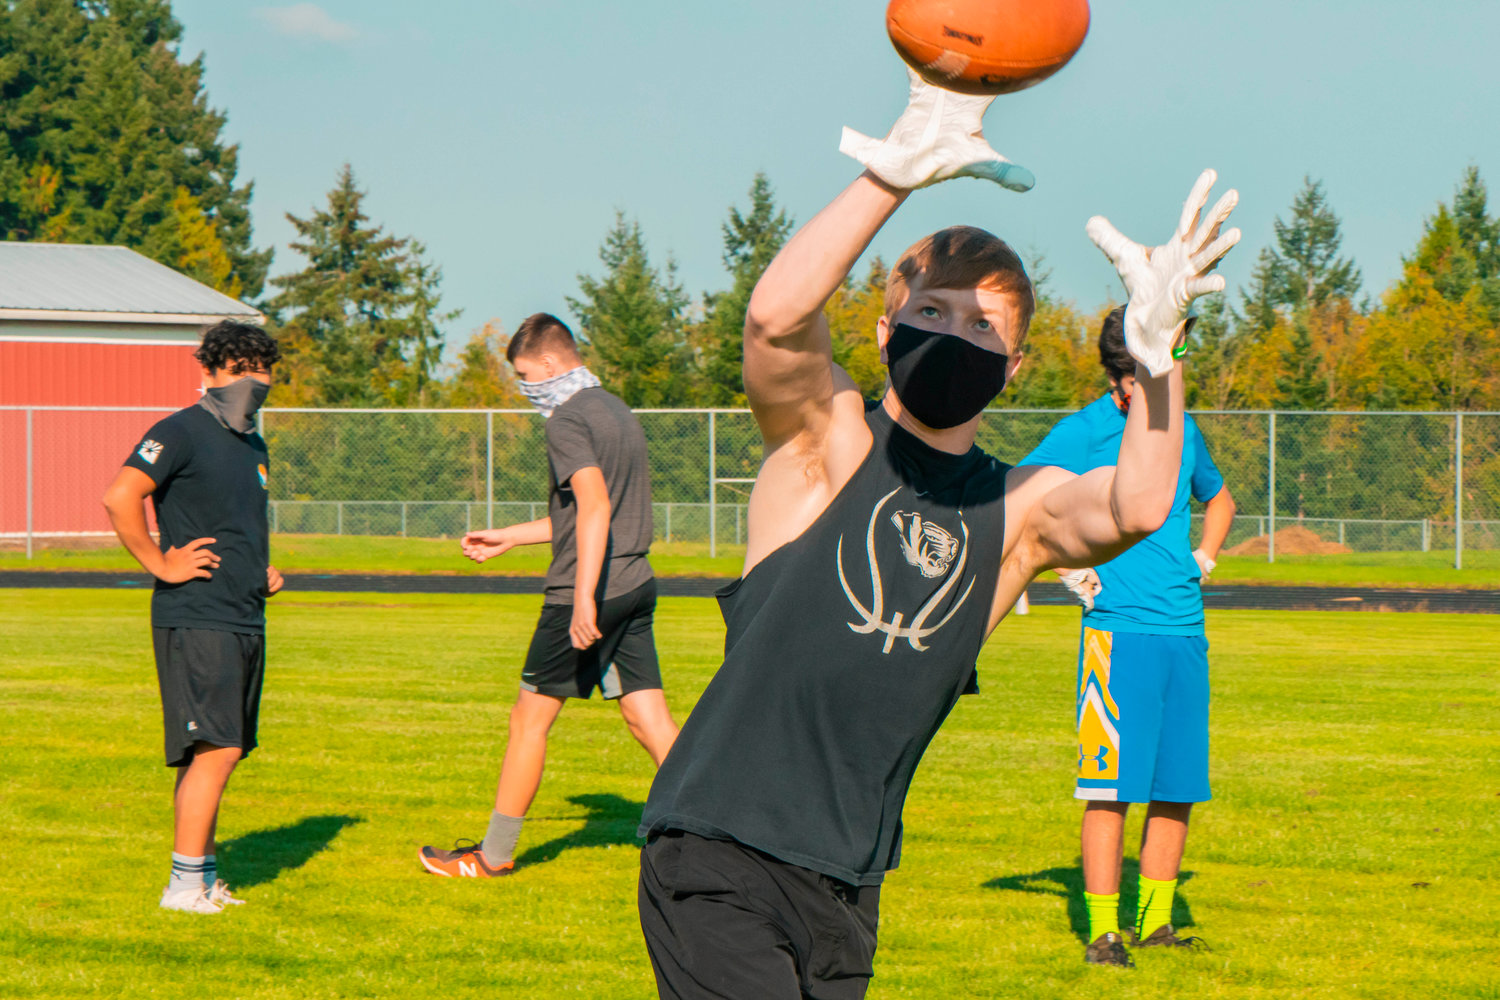 Players sport masks while catching footballs Wednesday afternoon at Napavine High School.